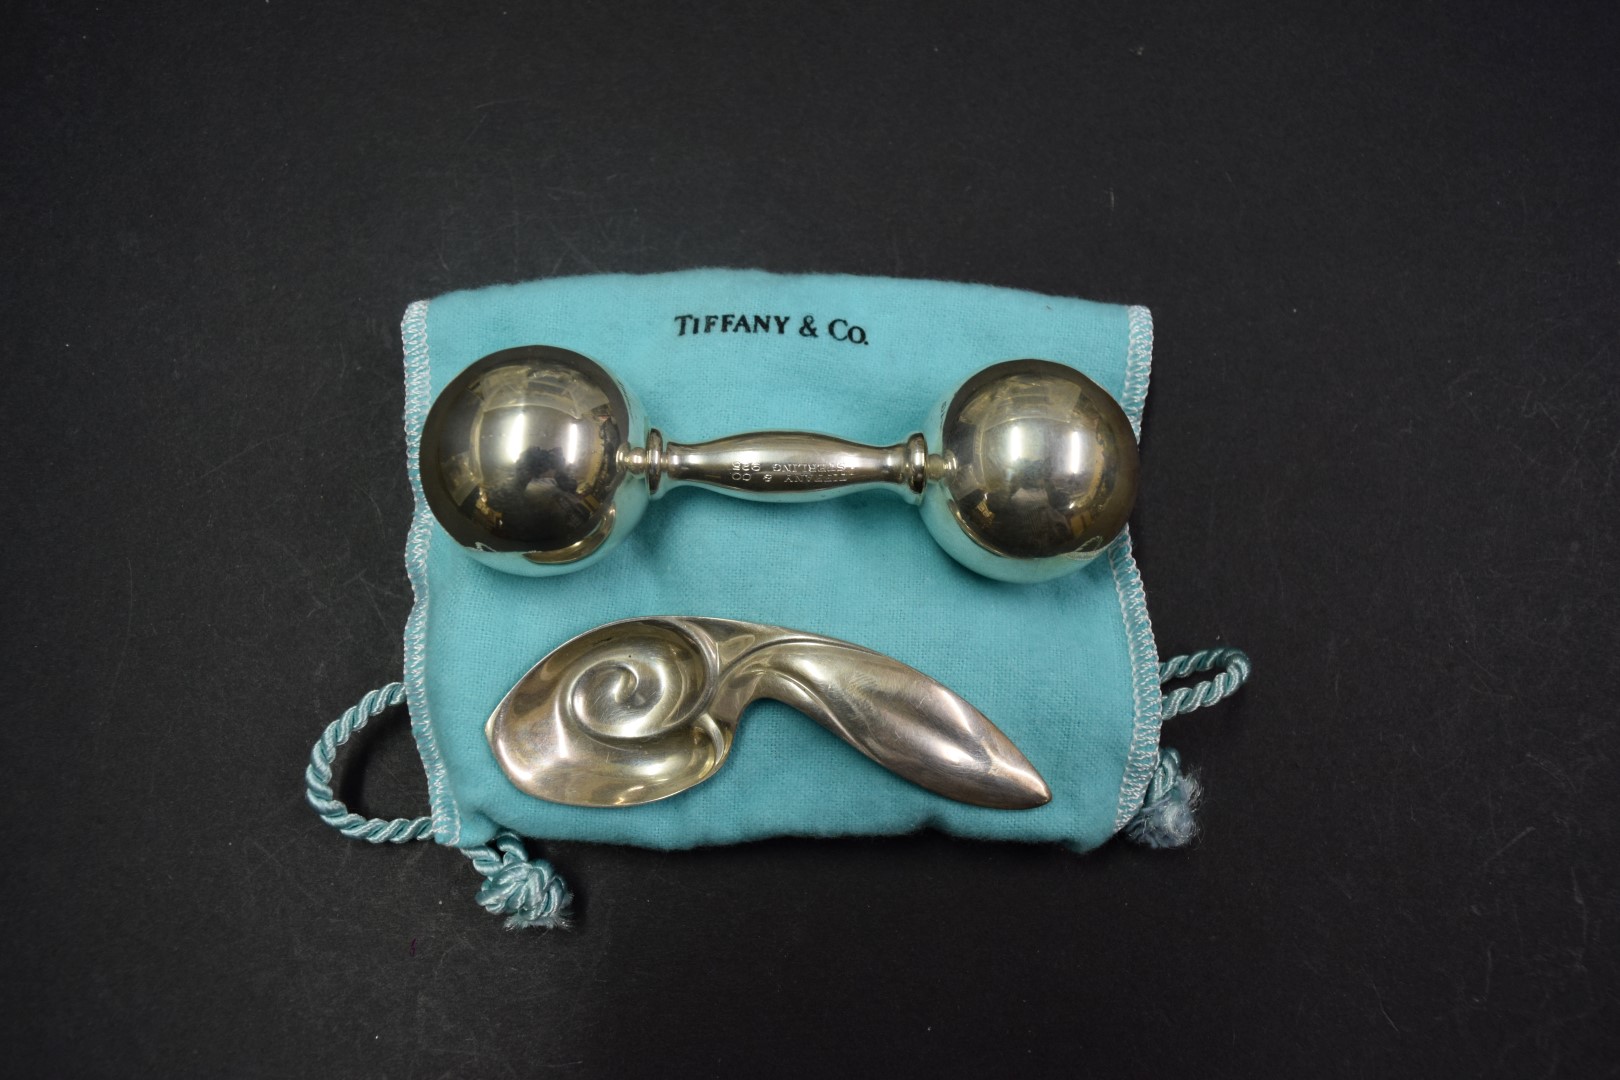 A Tiffany & Co sterling child's bell rattle, 11.